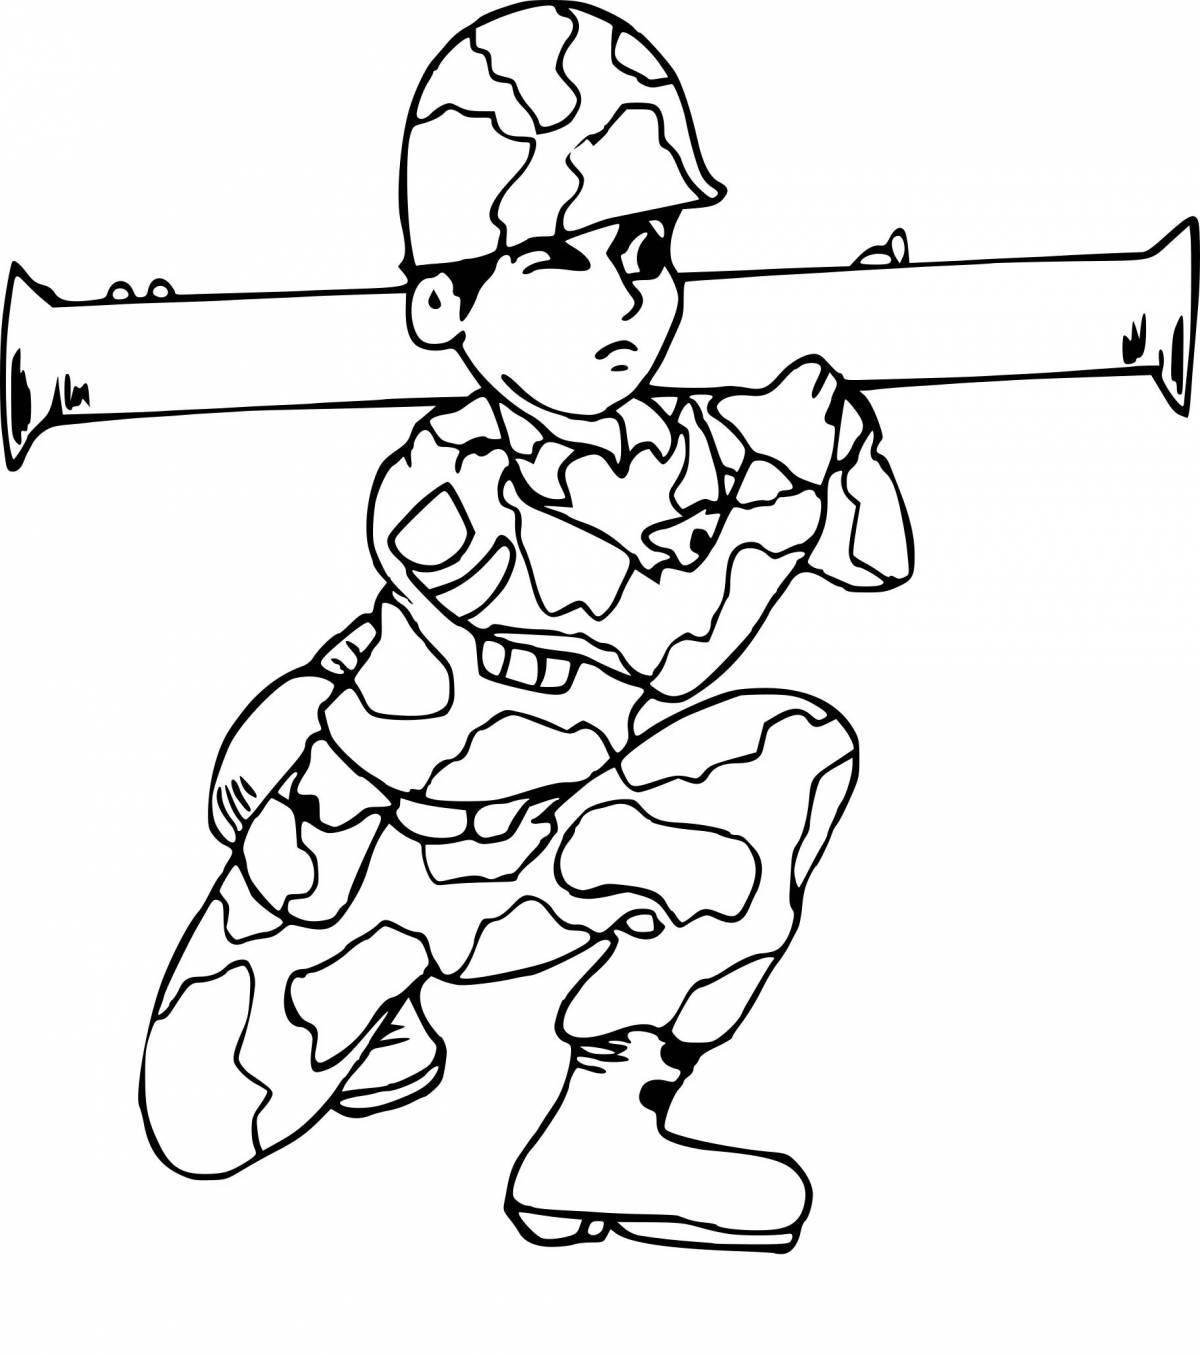 Bright coloring pages soldiers for boys